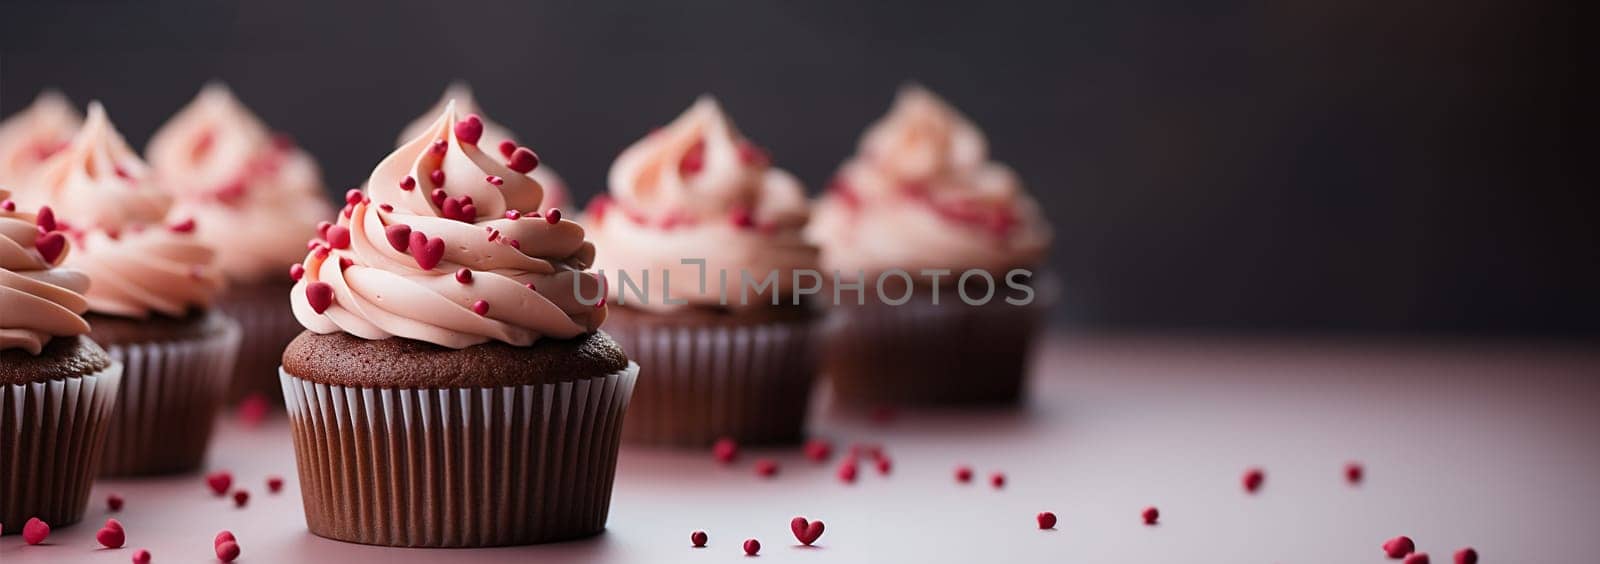 Banner Festive cupcakes with a heart inside for Valentine's Day decorated with sprinkles with hearts. Love concept. Selective focus. Delicious sweets Valentine's Day by Annebel146